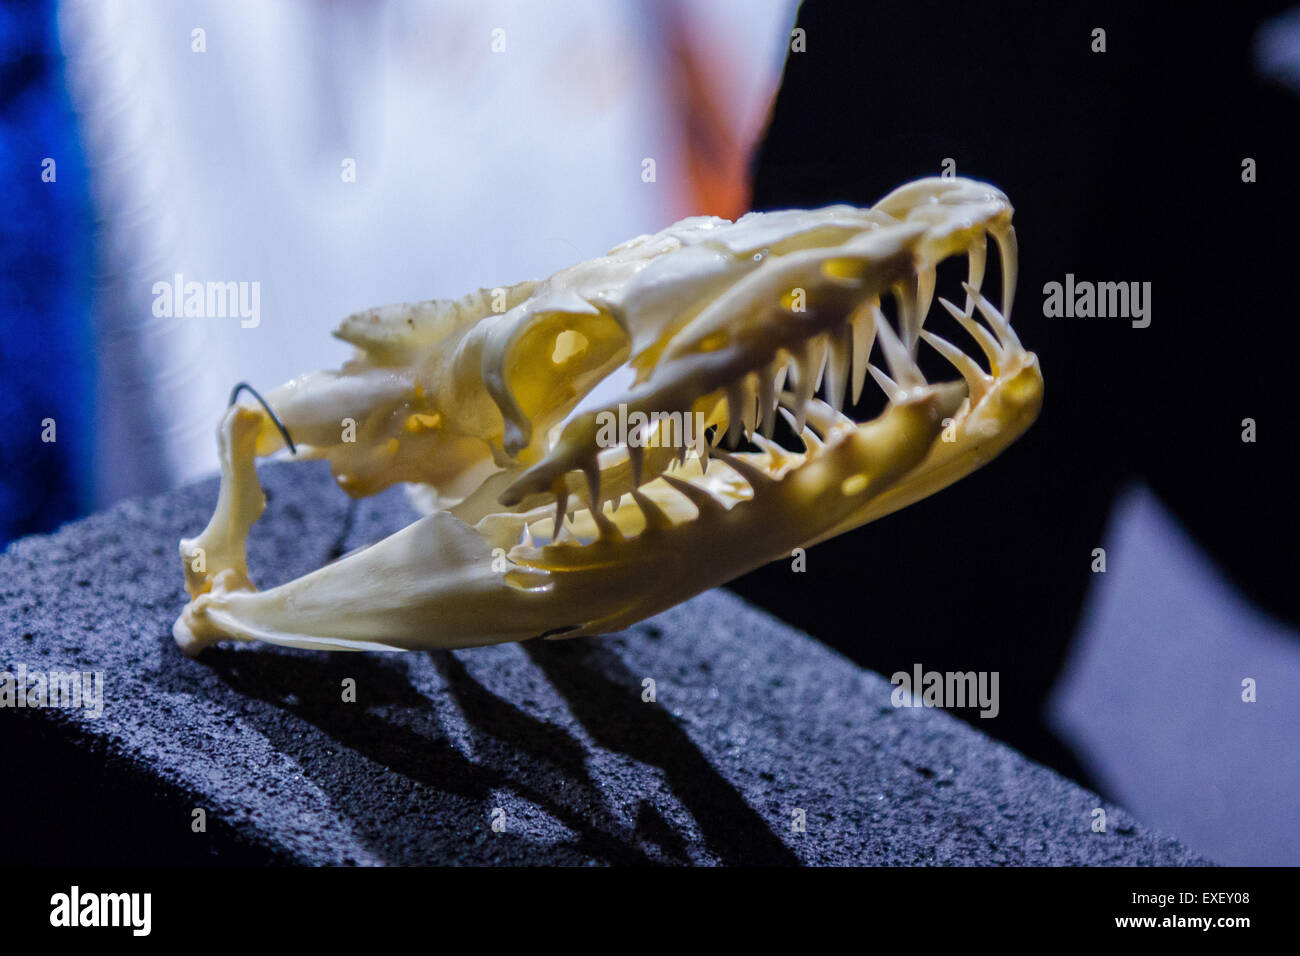 skeleton of the head of a snake Stock Photo